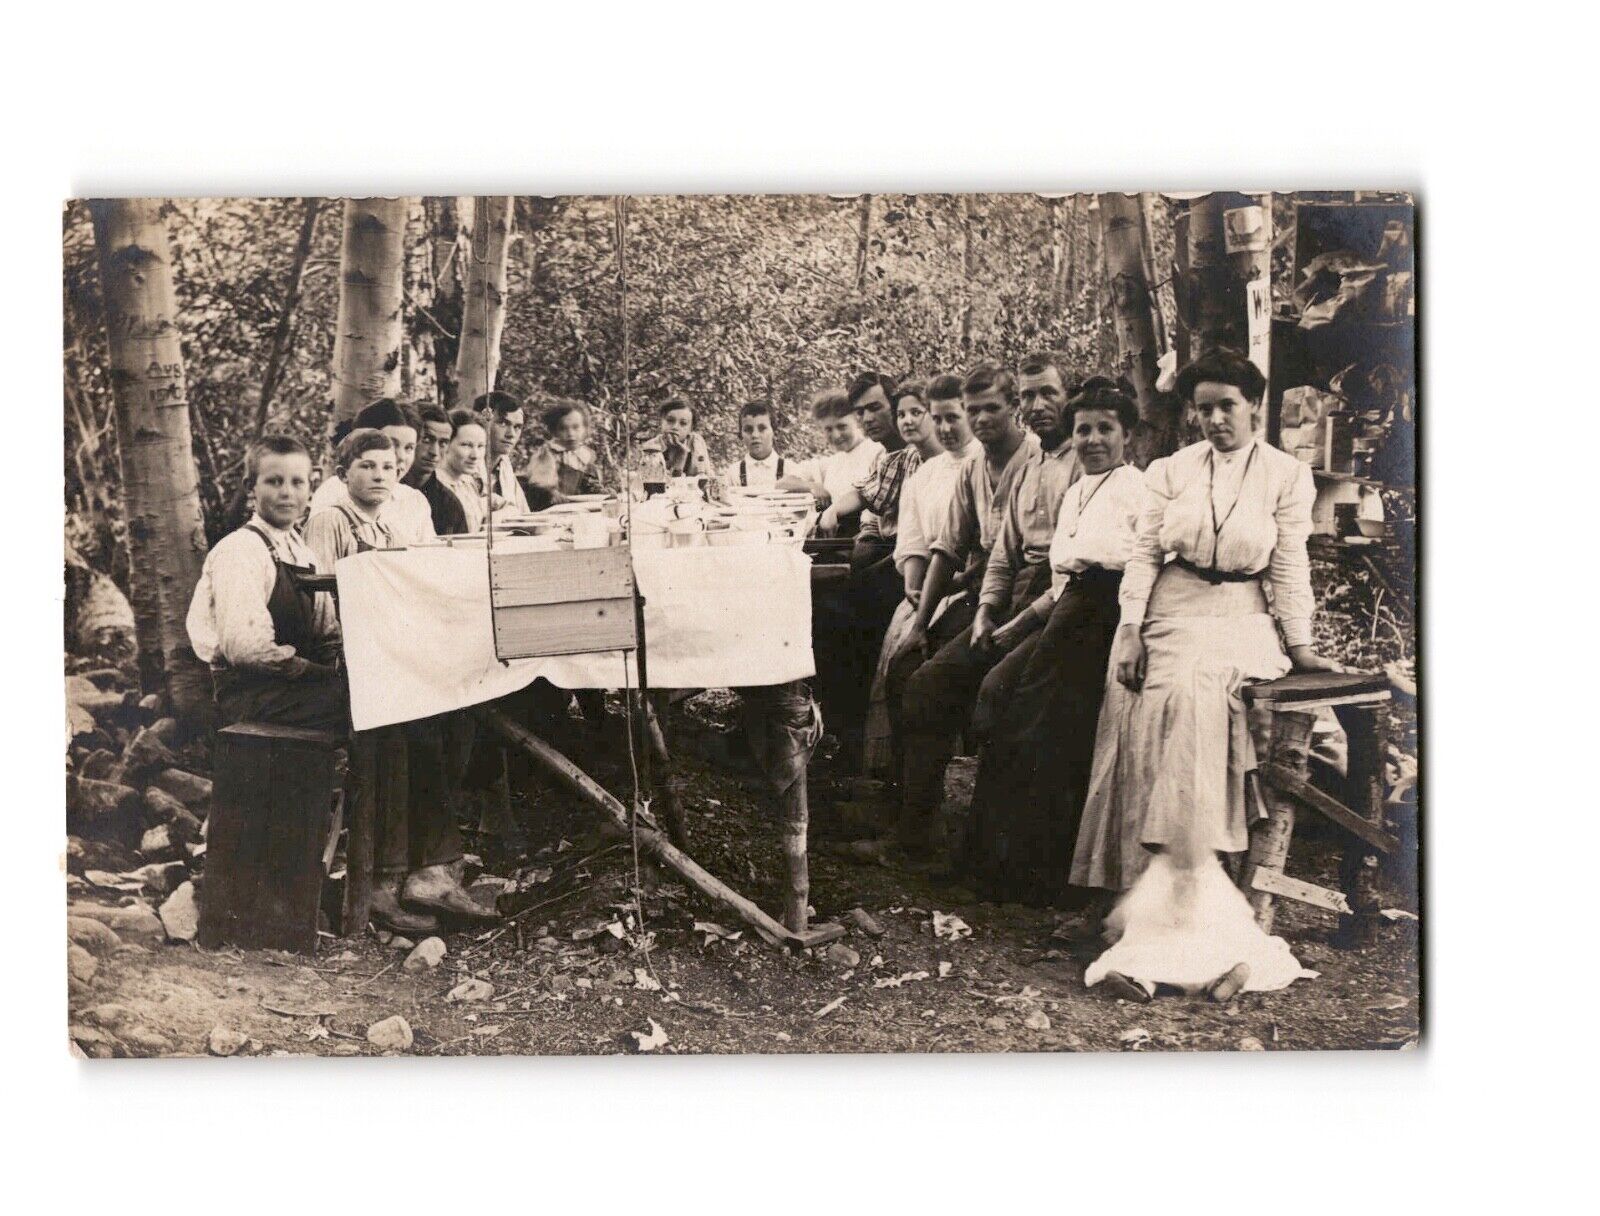 RPPC Vintage Postcard Early 1900s Group Picnic